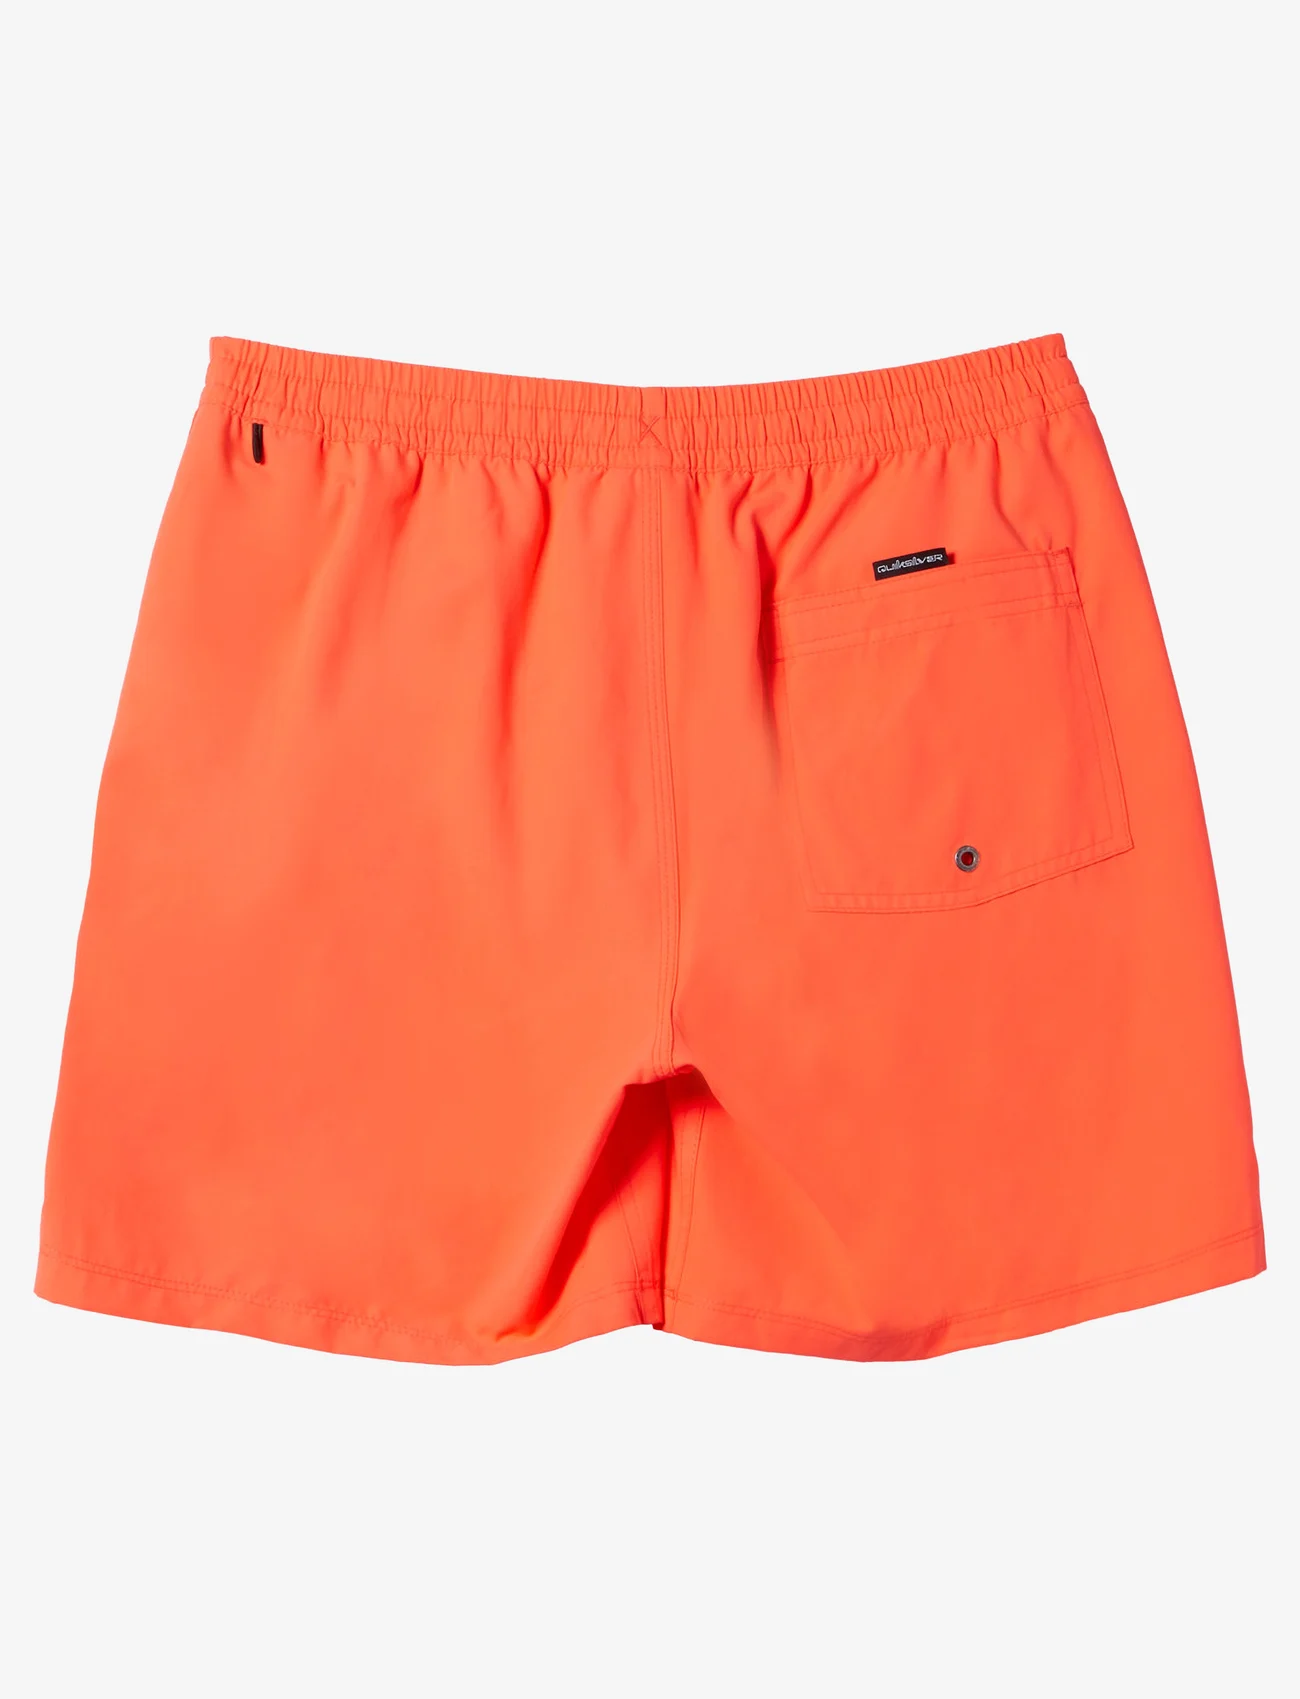 Quiksilver - EVERYDAY SOLID VOLLEY 15 - laveste priser - fiery coral - 1